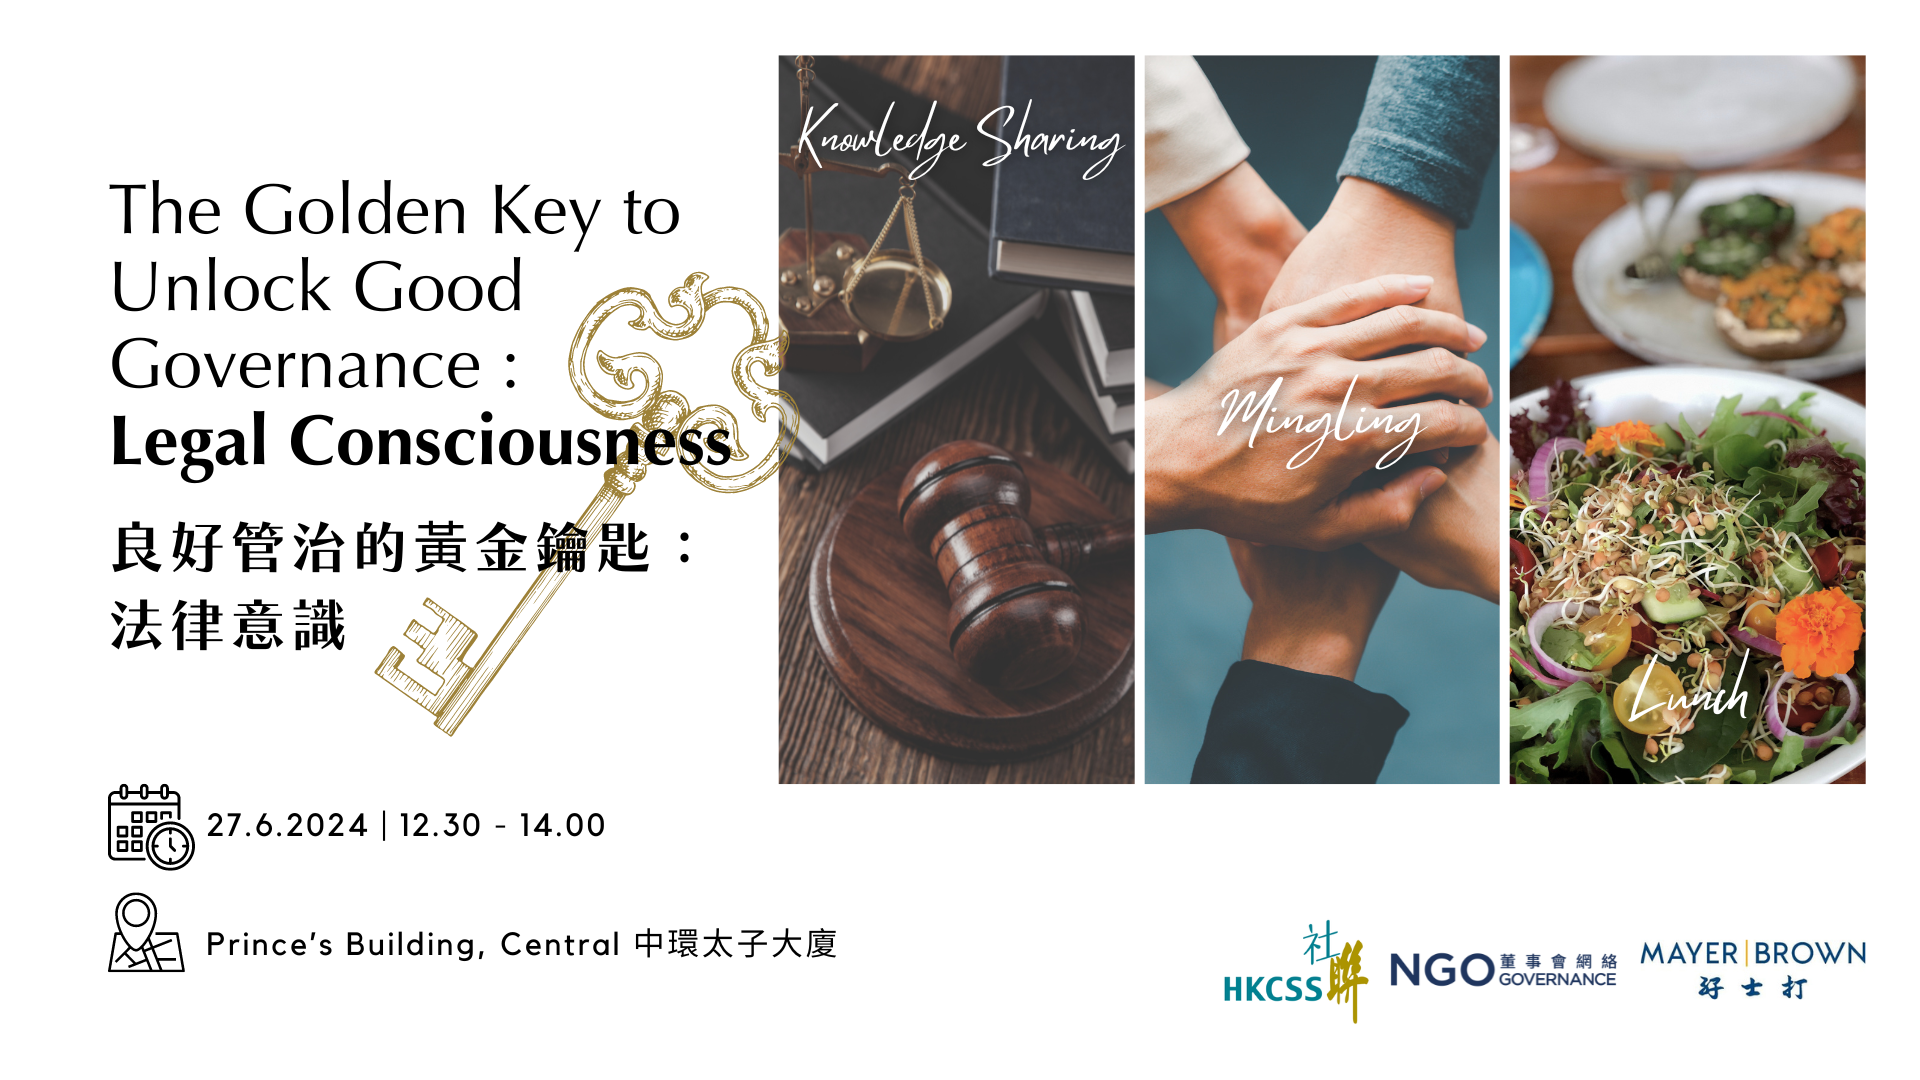 Learning Platform on NGO Governance and Management | The Golden Key to Unlock Good Governance: Legal Consciousness